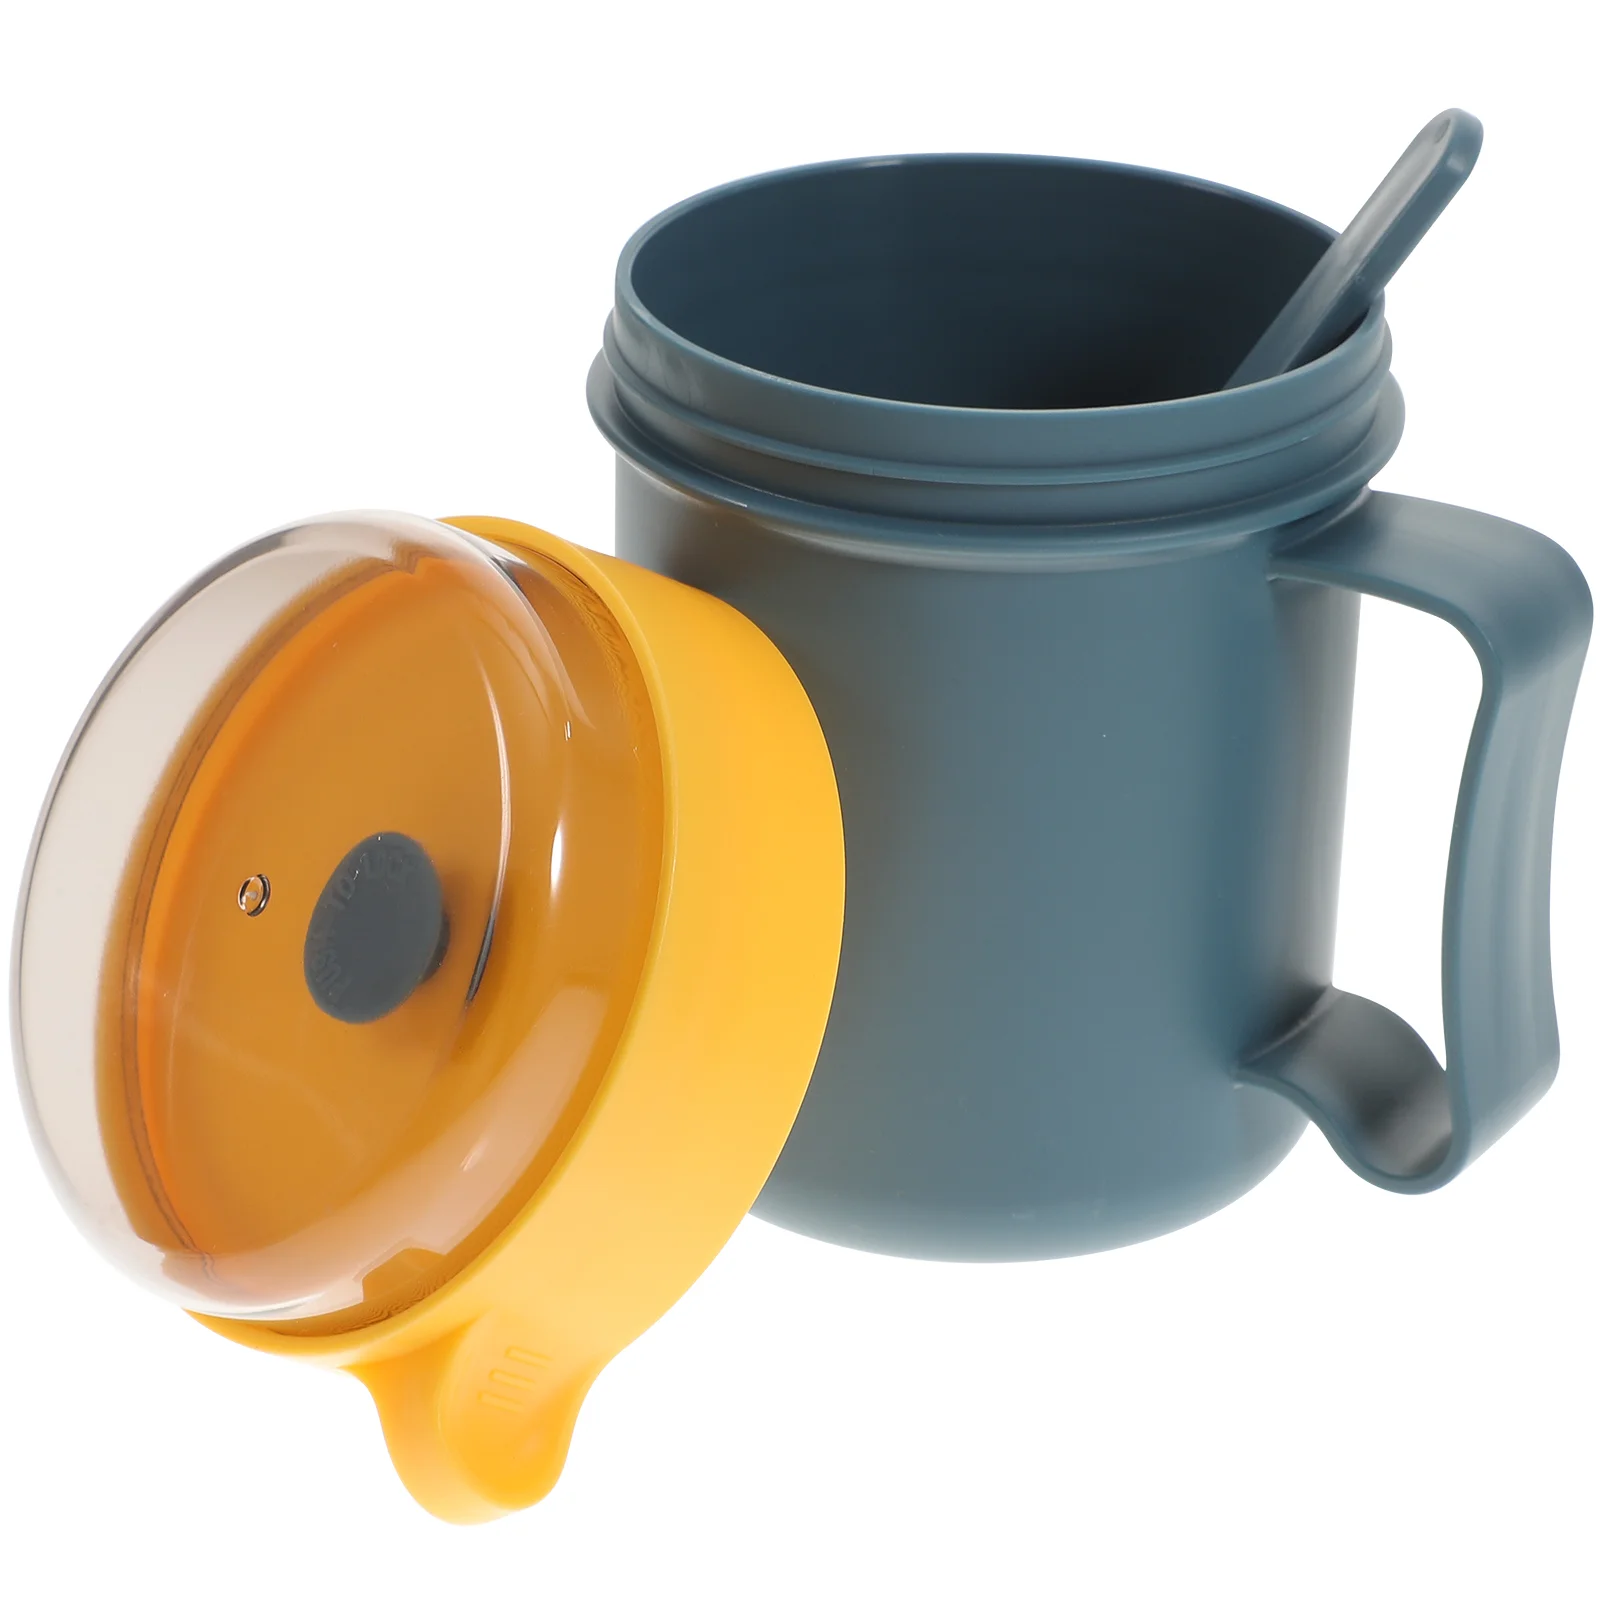 

Insulated Lunch Container Hot: Wide Mouth Jar for Hot Soup Cereal Breakfast Cup Microwave Oven Cup Portable Blue